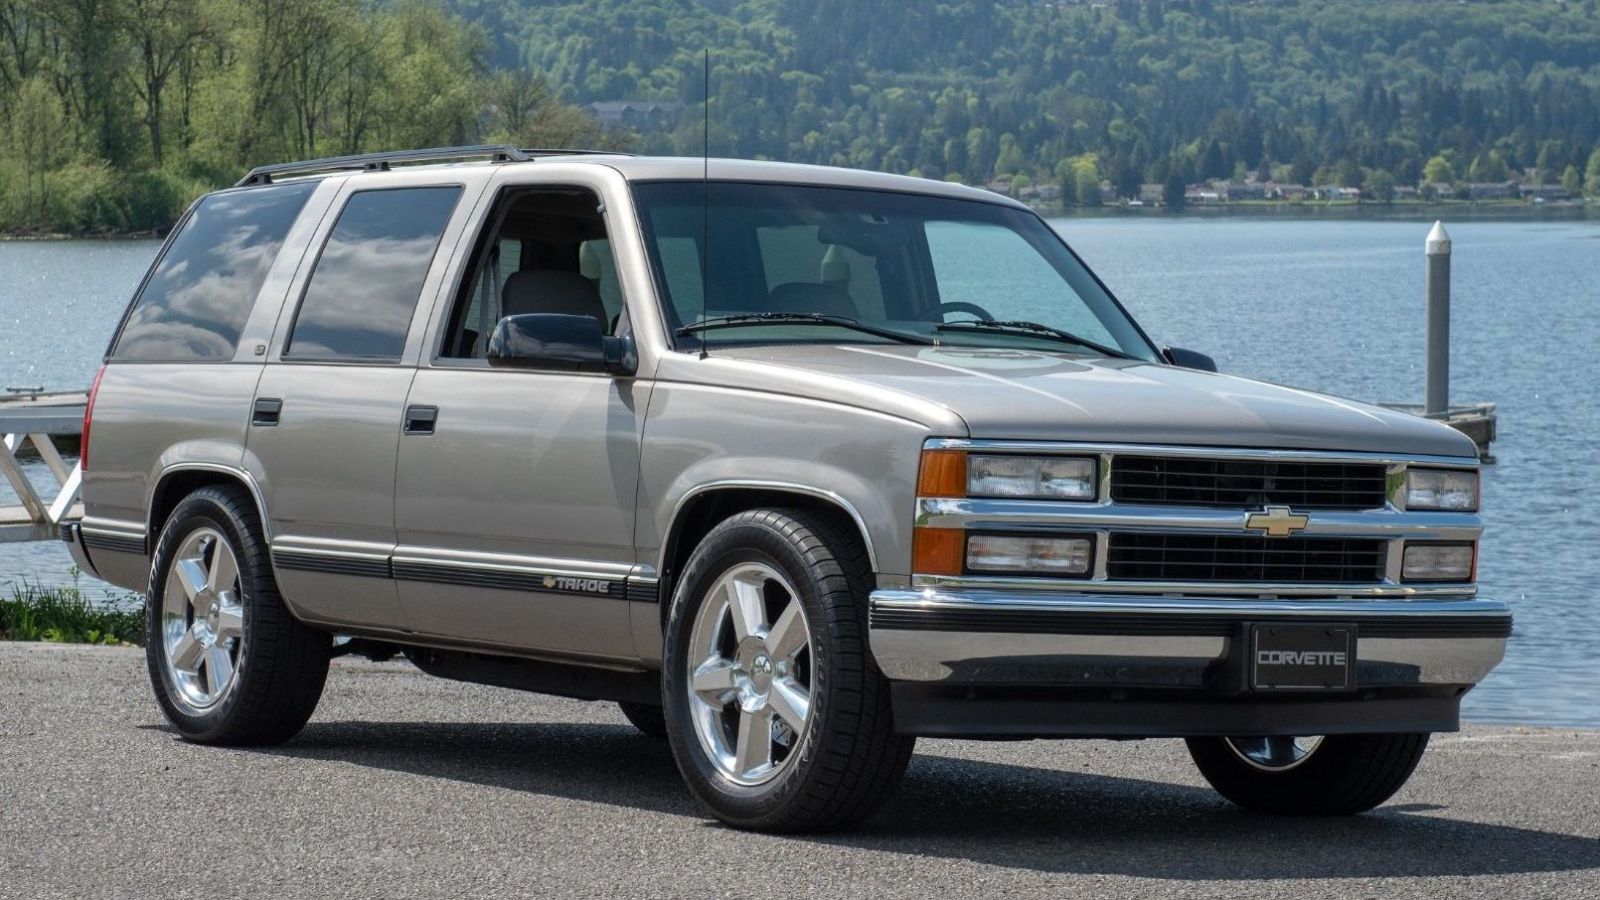 Imagine a clean Tahoe. Then add 10 points and try again.